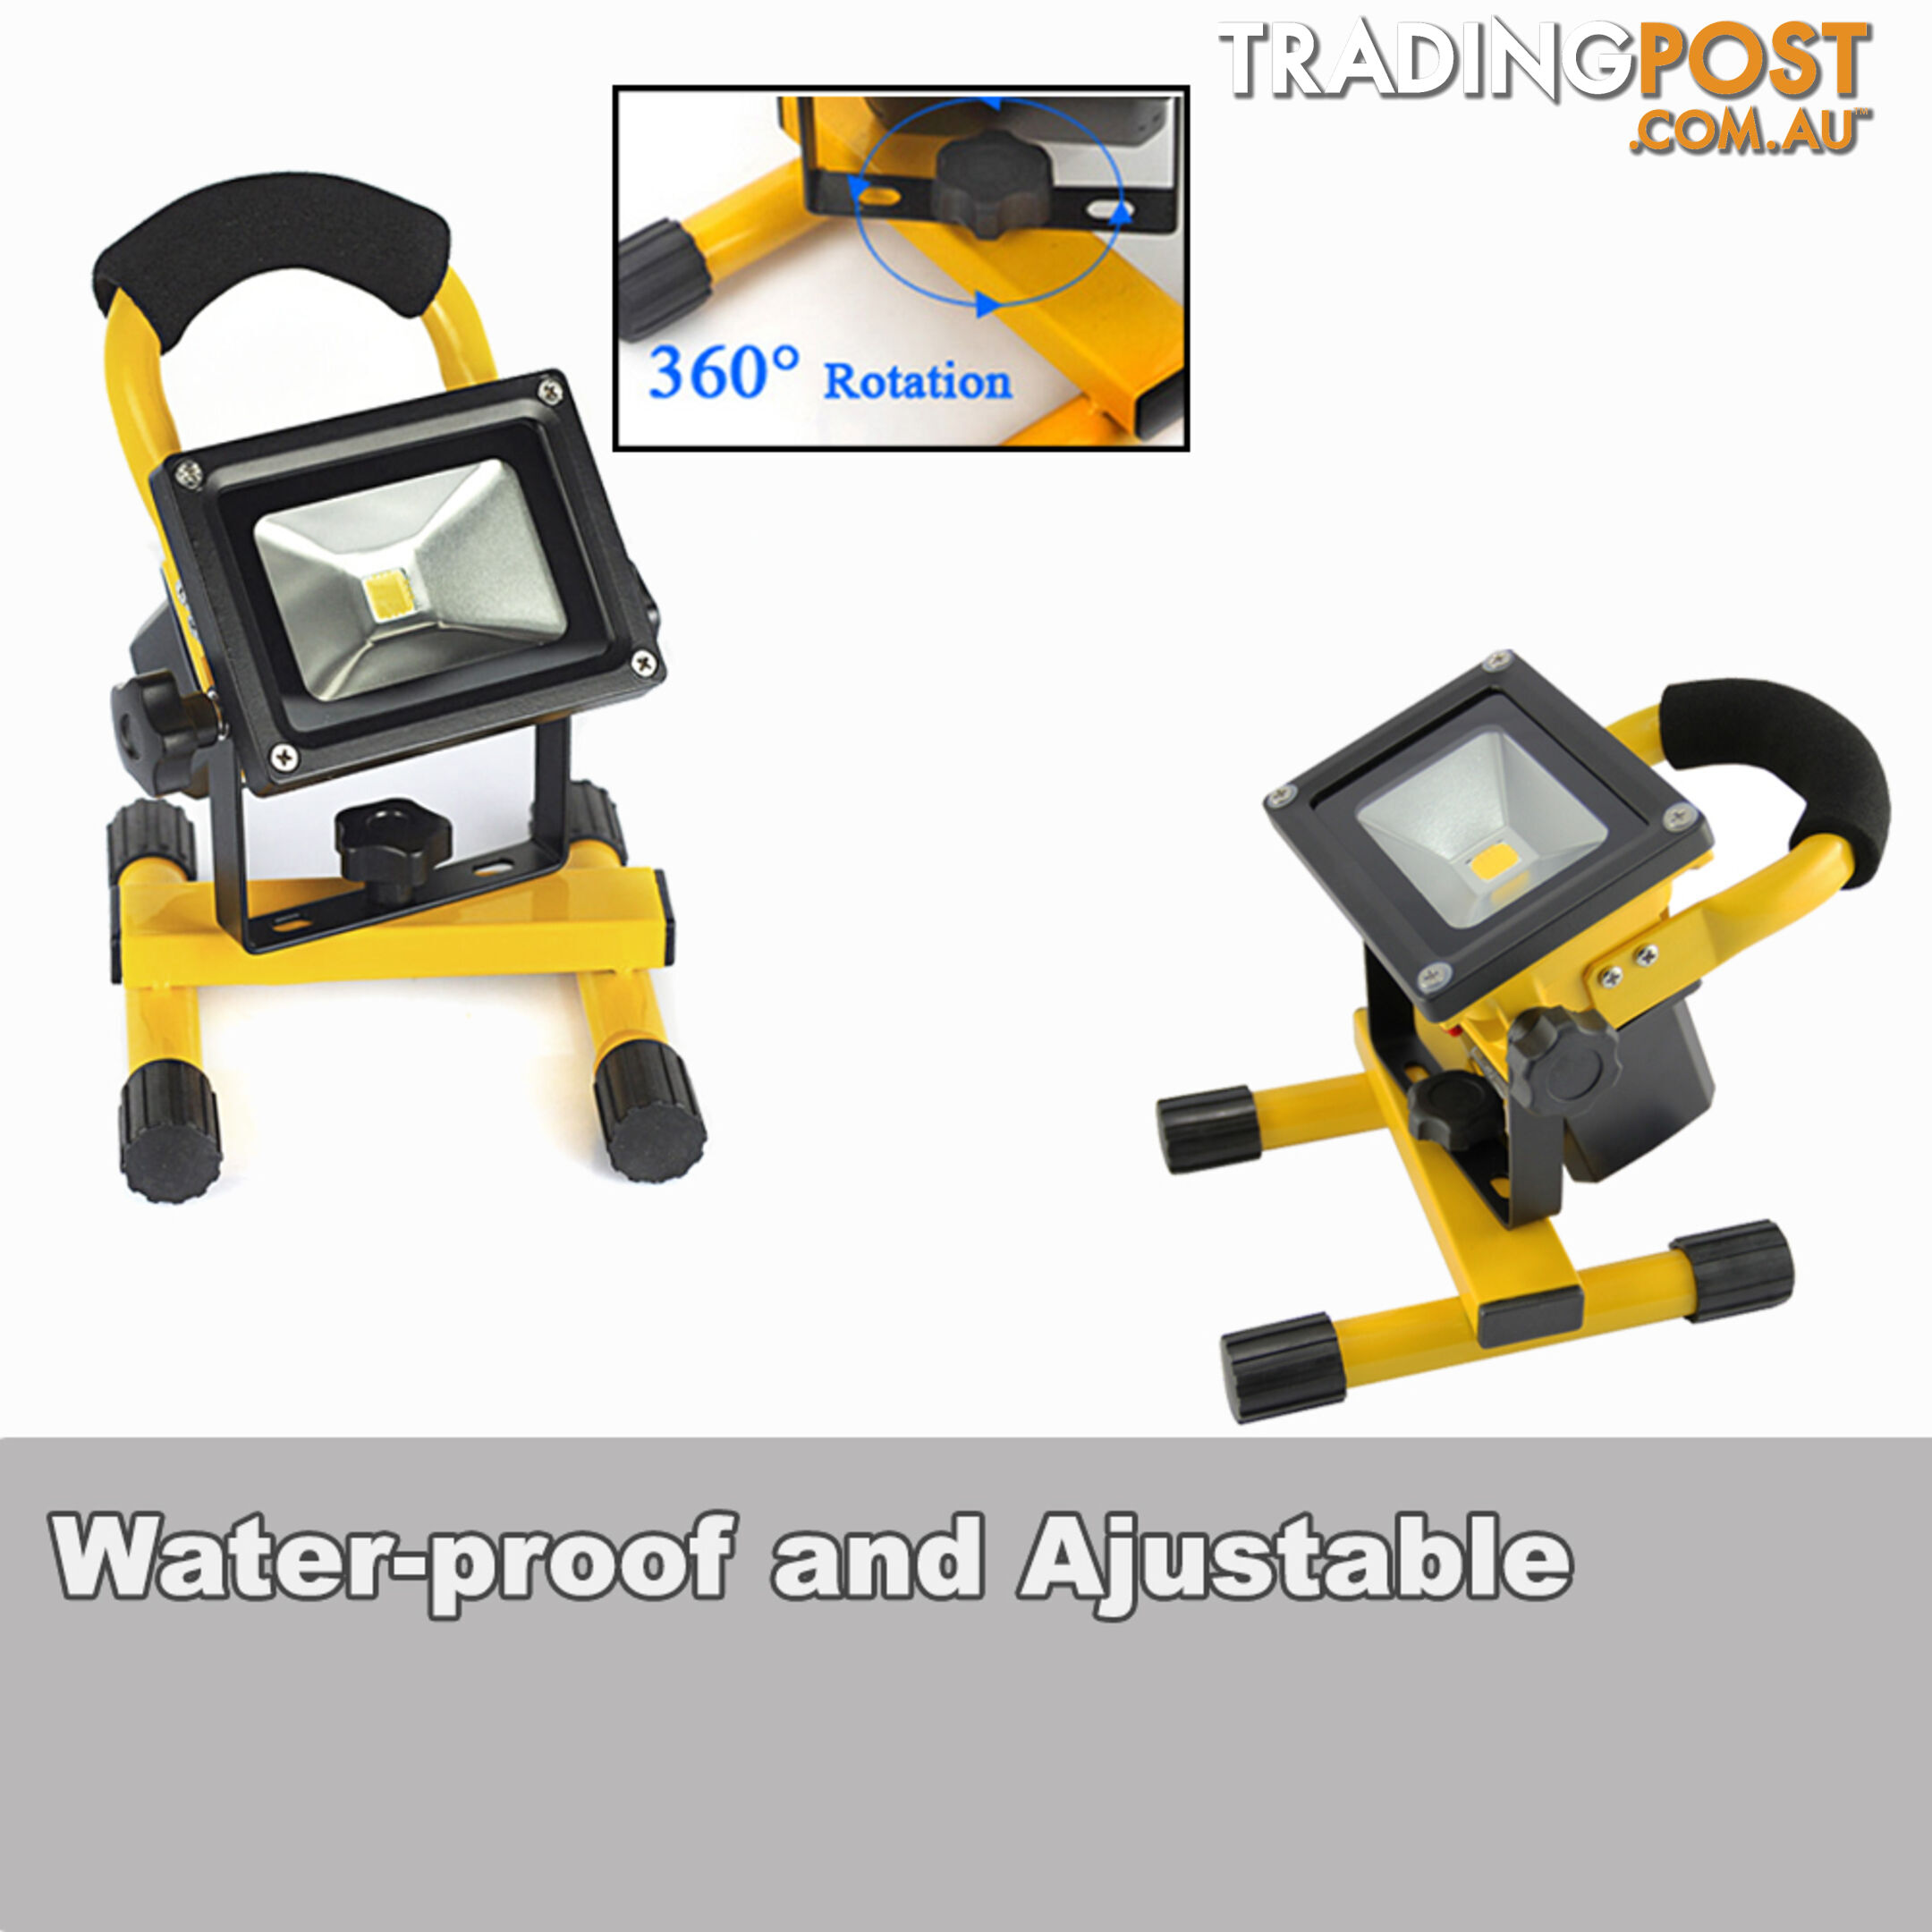 10W PORTABLE LED WORK LIGHT RECHARGEABLE FLOOD LIGHT LAMP CAMPING YELLOW